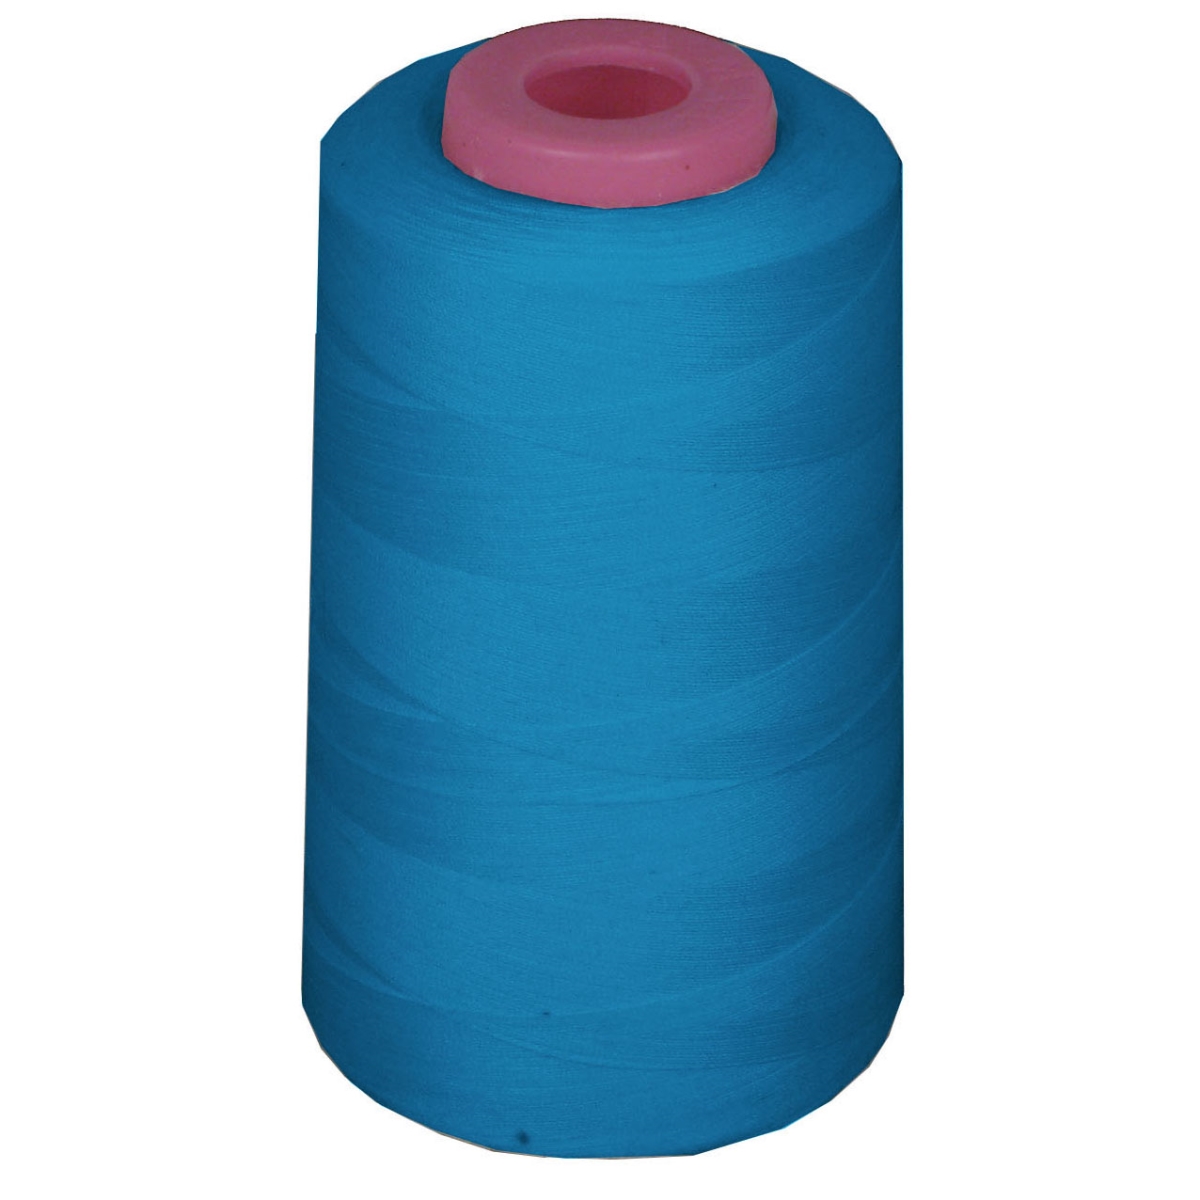 Picture of LA Linen ThreadTurquoiseAX747 6000 Yards 100 Percent Polyester Cone Serger Thread, Turquoise - AX747